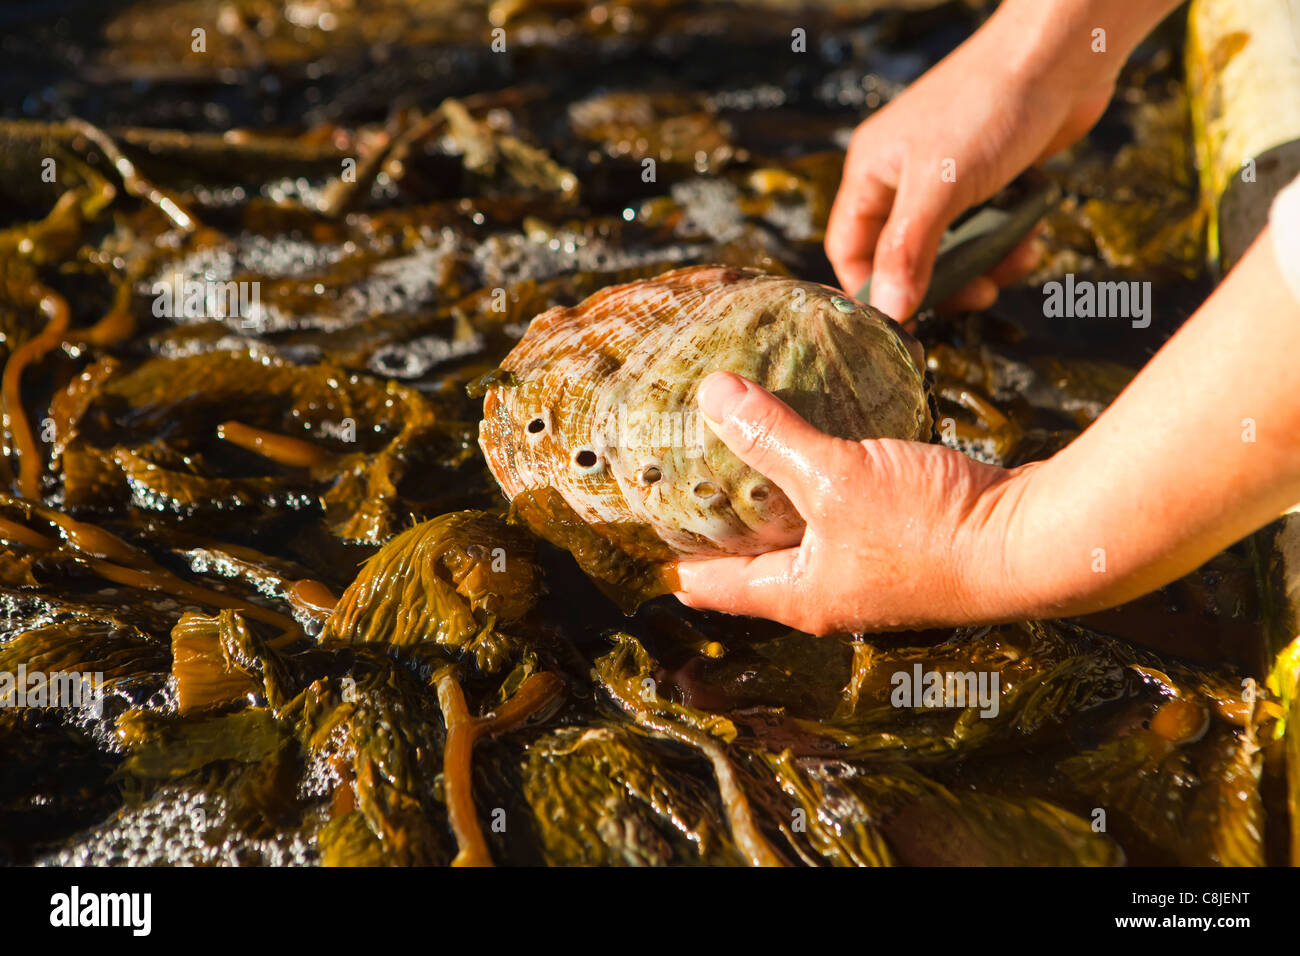 worker inspects abalone at Cultured Abalone, Goleta, California Stock Photo